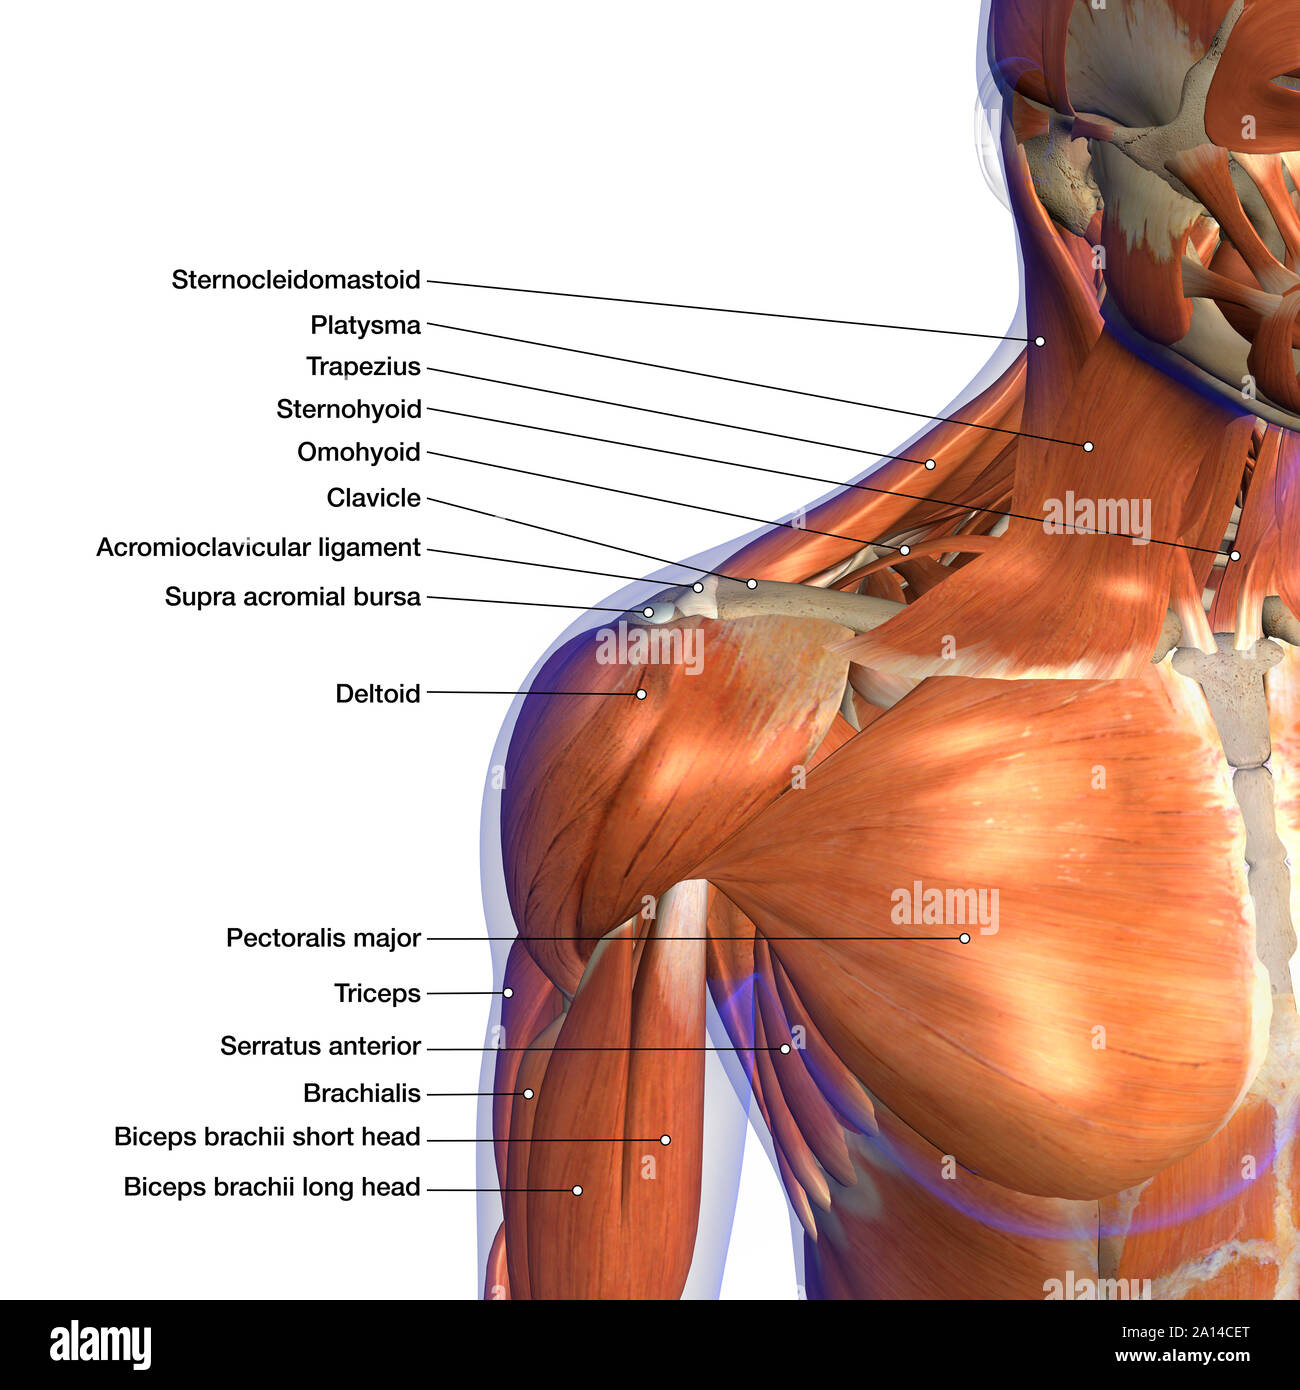 Labeled anatomy chart of neck and shoulder muscles, on white background. Stock Photo